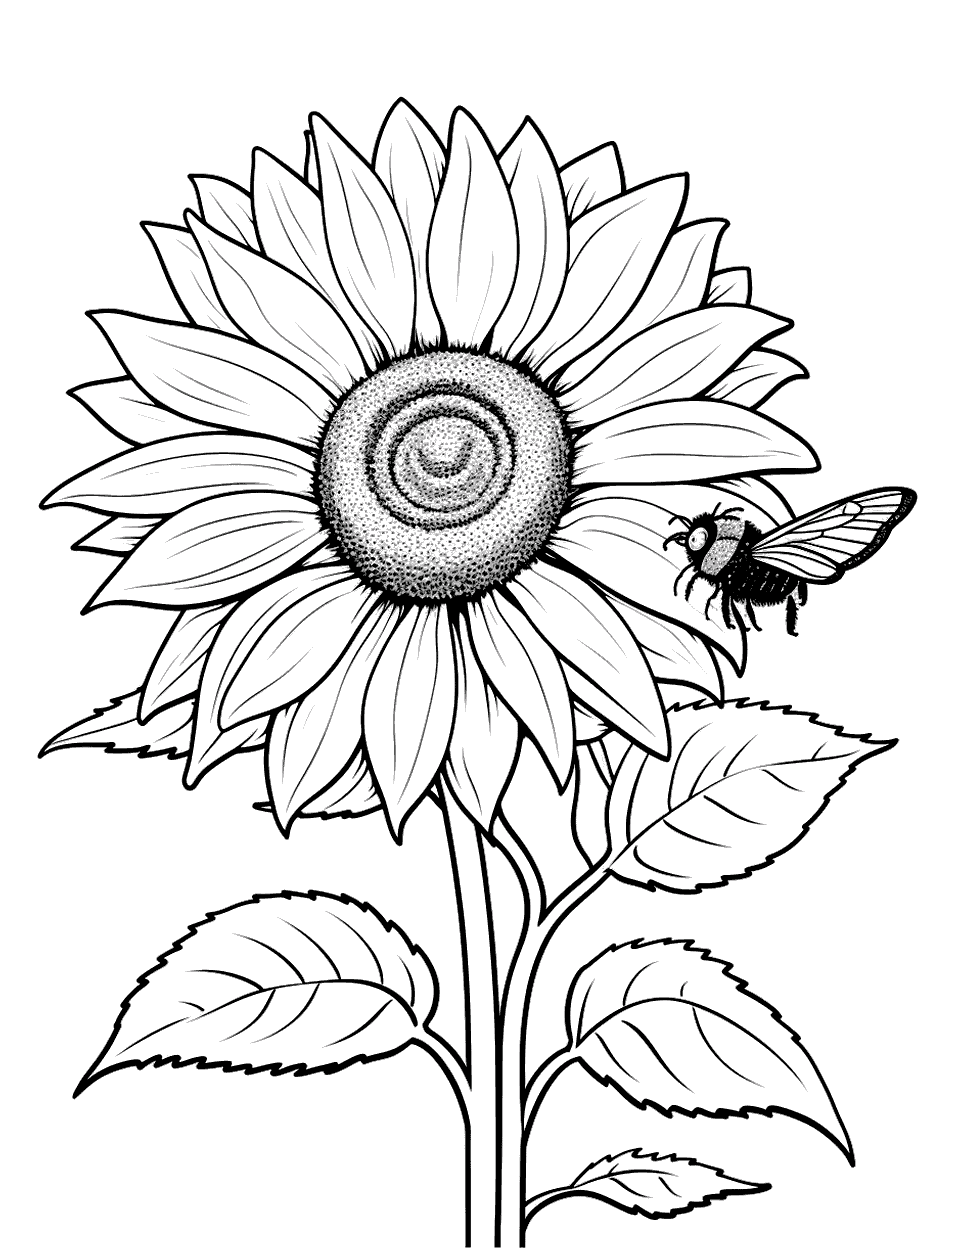 Bee Buzzing Around Sunflower Coloring Page - A bee flying near a sunflower, collecting pollen.